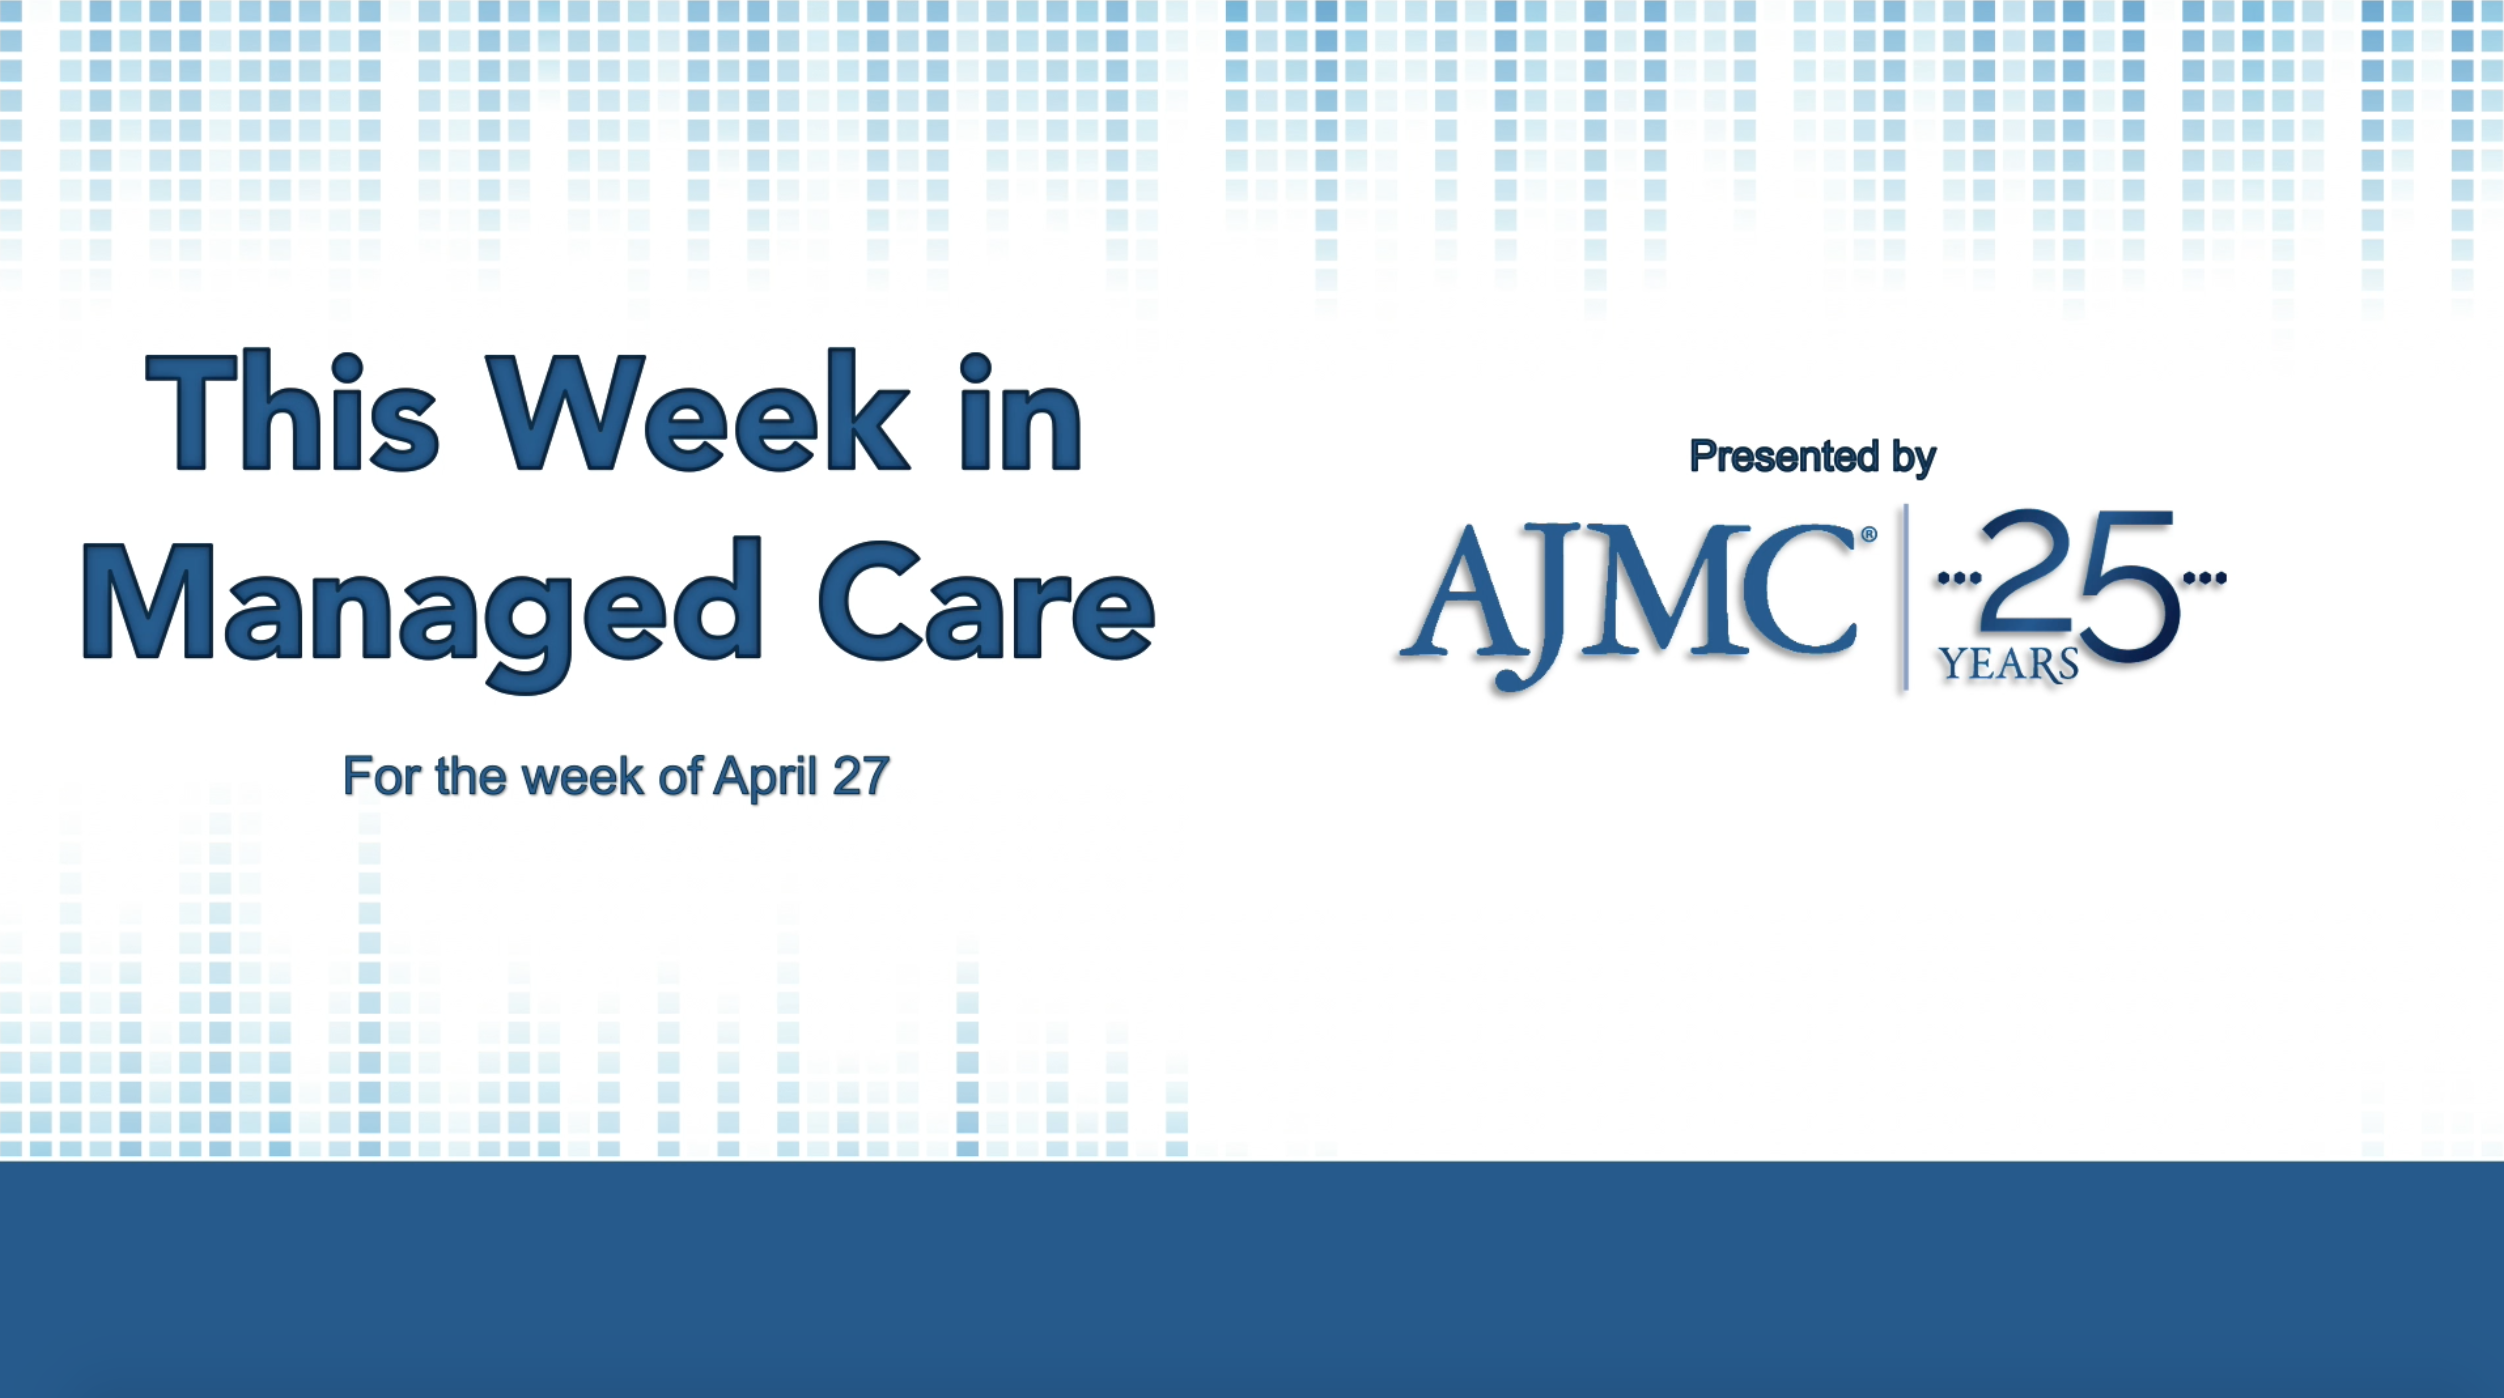 This Week in Managed Care: May 1, 2020